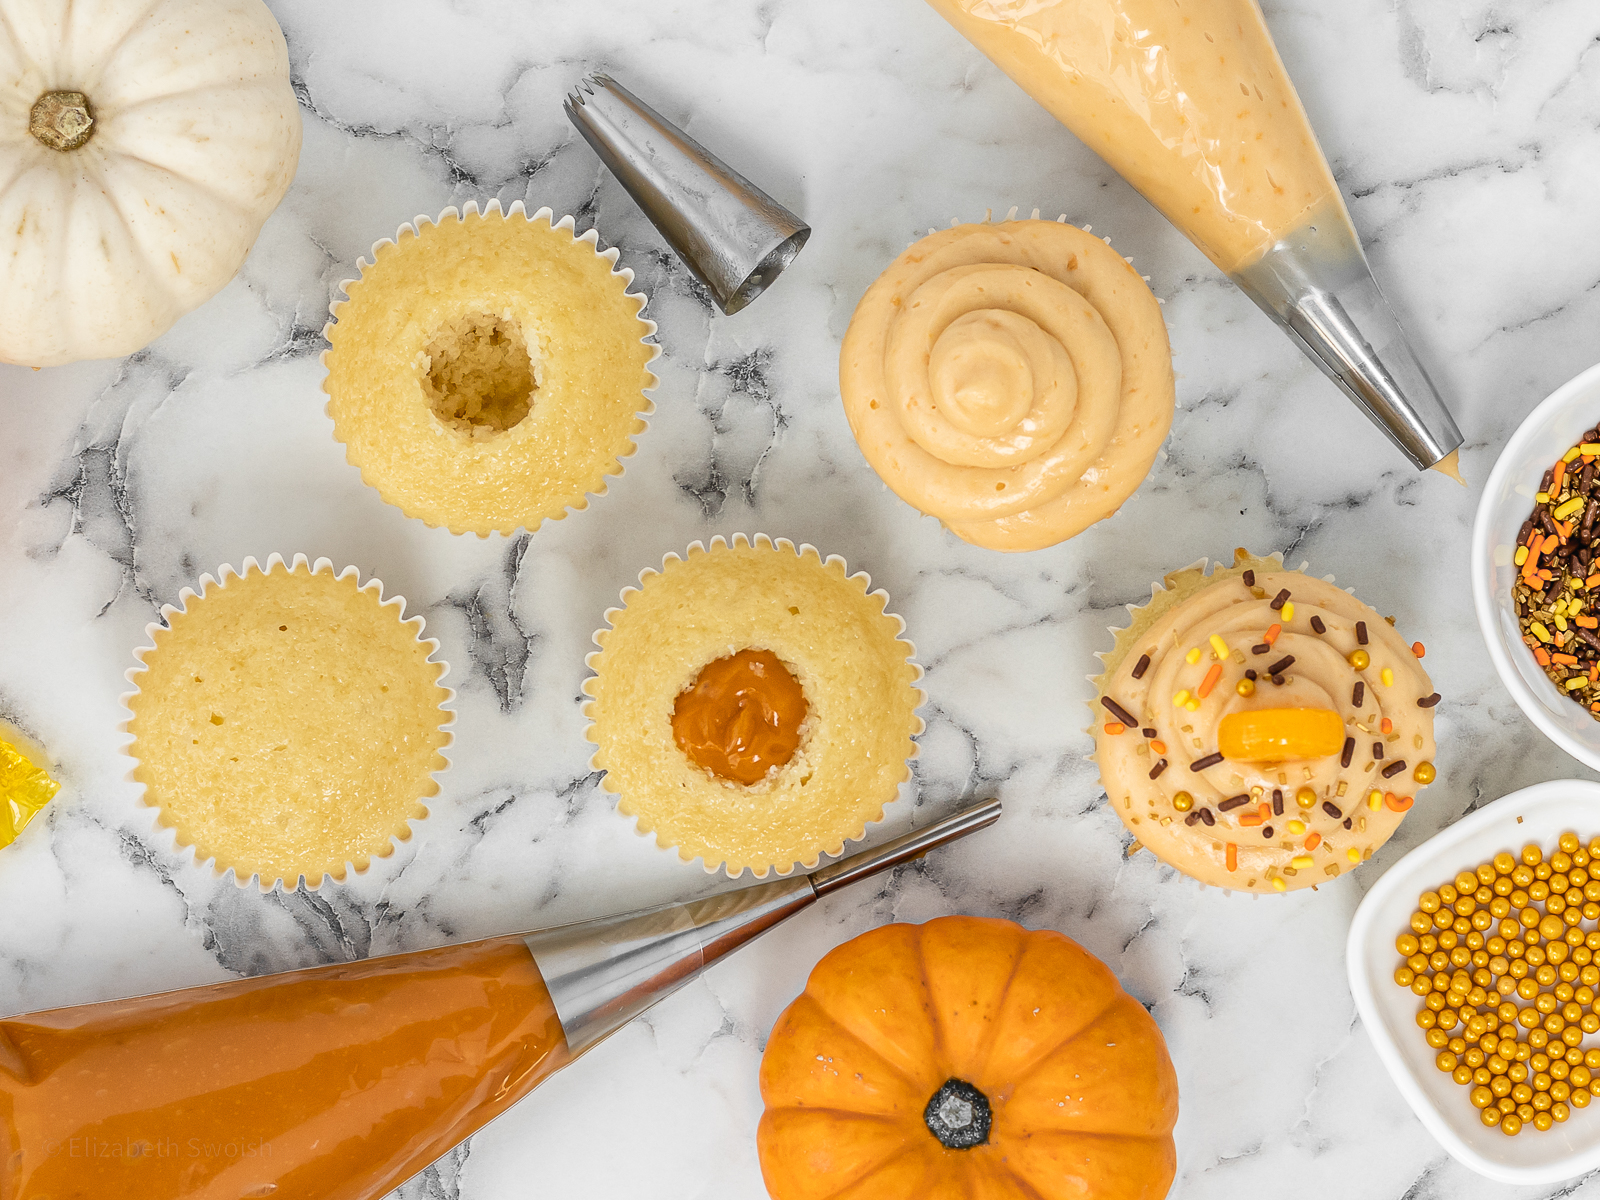 Row of cupcakes. The first is a whole vanilla cupcake, second has the center cored out, third the core is filled with butterscotch pudding, the fourth is topped with butterscotch buttercream, the fifth is decorated with festive fall sprinkles and a butterscotch candy.